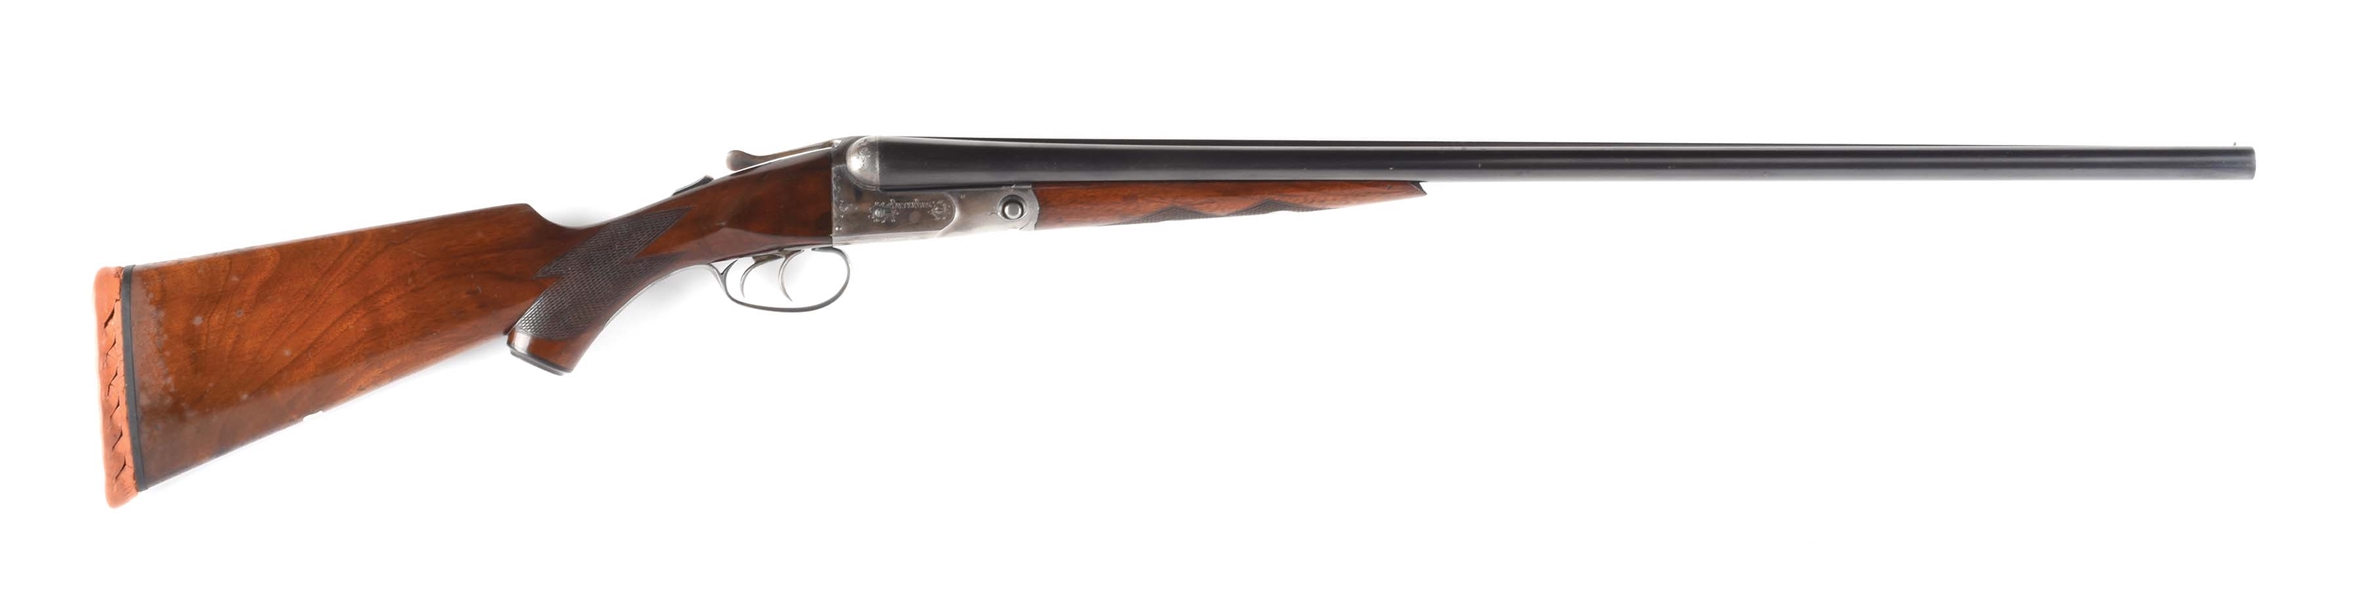 (C) SCARCE AND LATE PARKER BROS. PHE 16 BORE SIDE BY SIDE SHOTGUN.